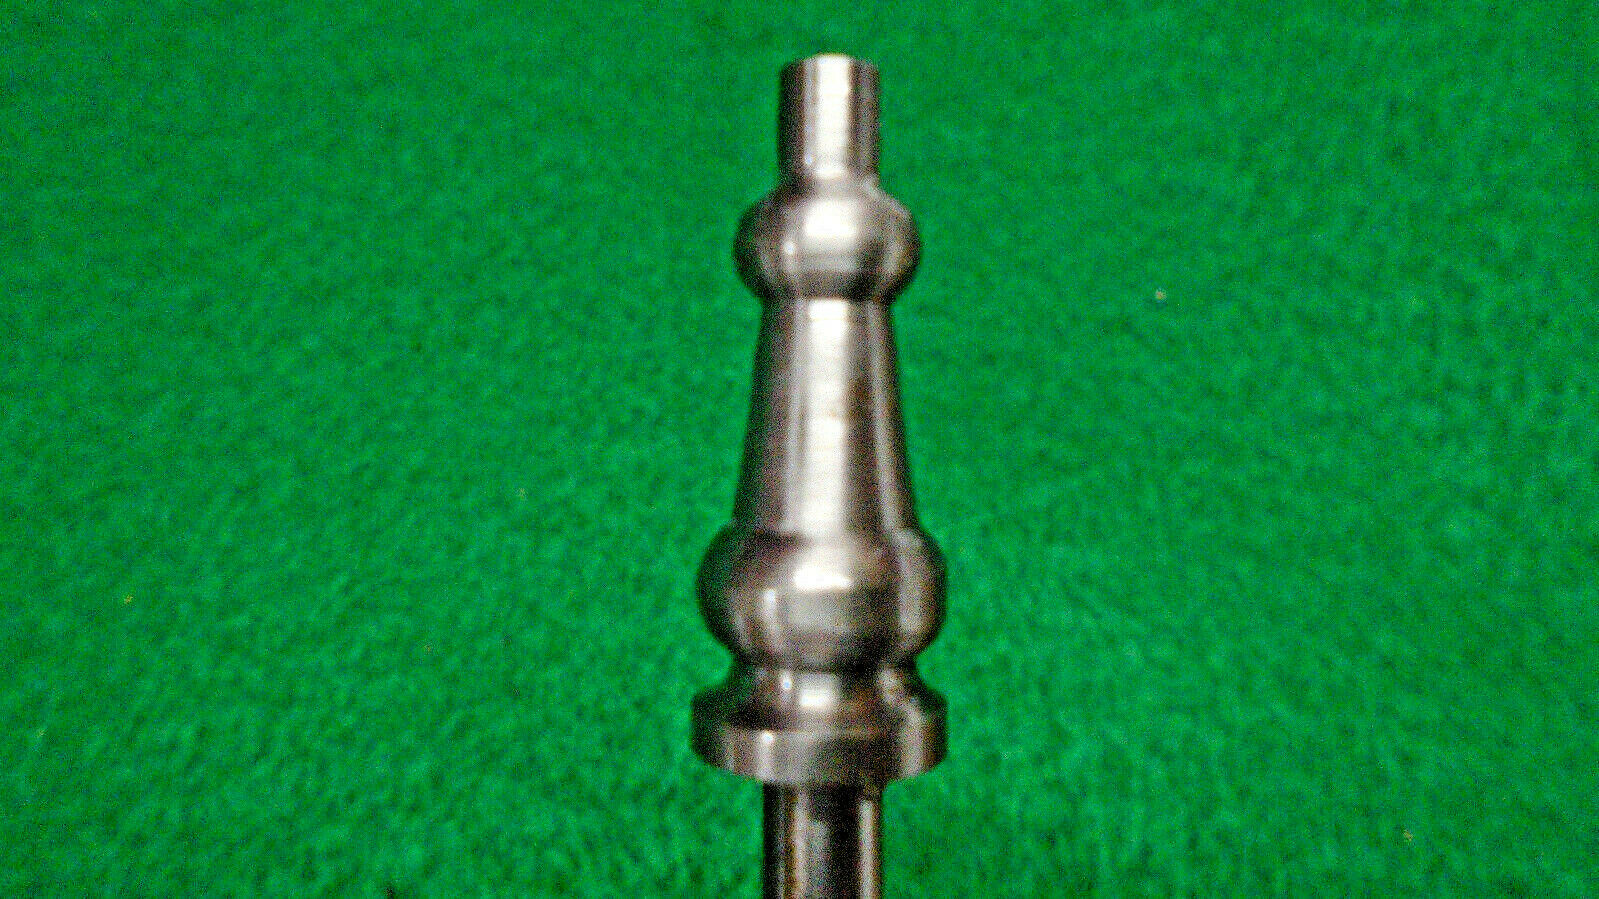 ONE STEEPLE TIP HINGE PIN REPLACEMENT for VICTORIAN STYLE HINGES (15783)